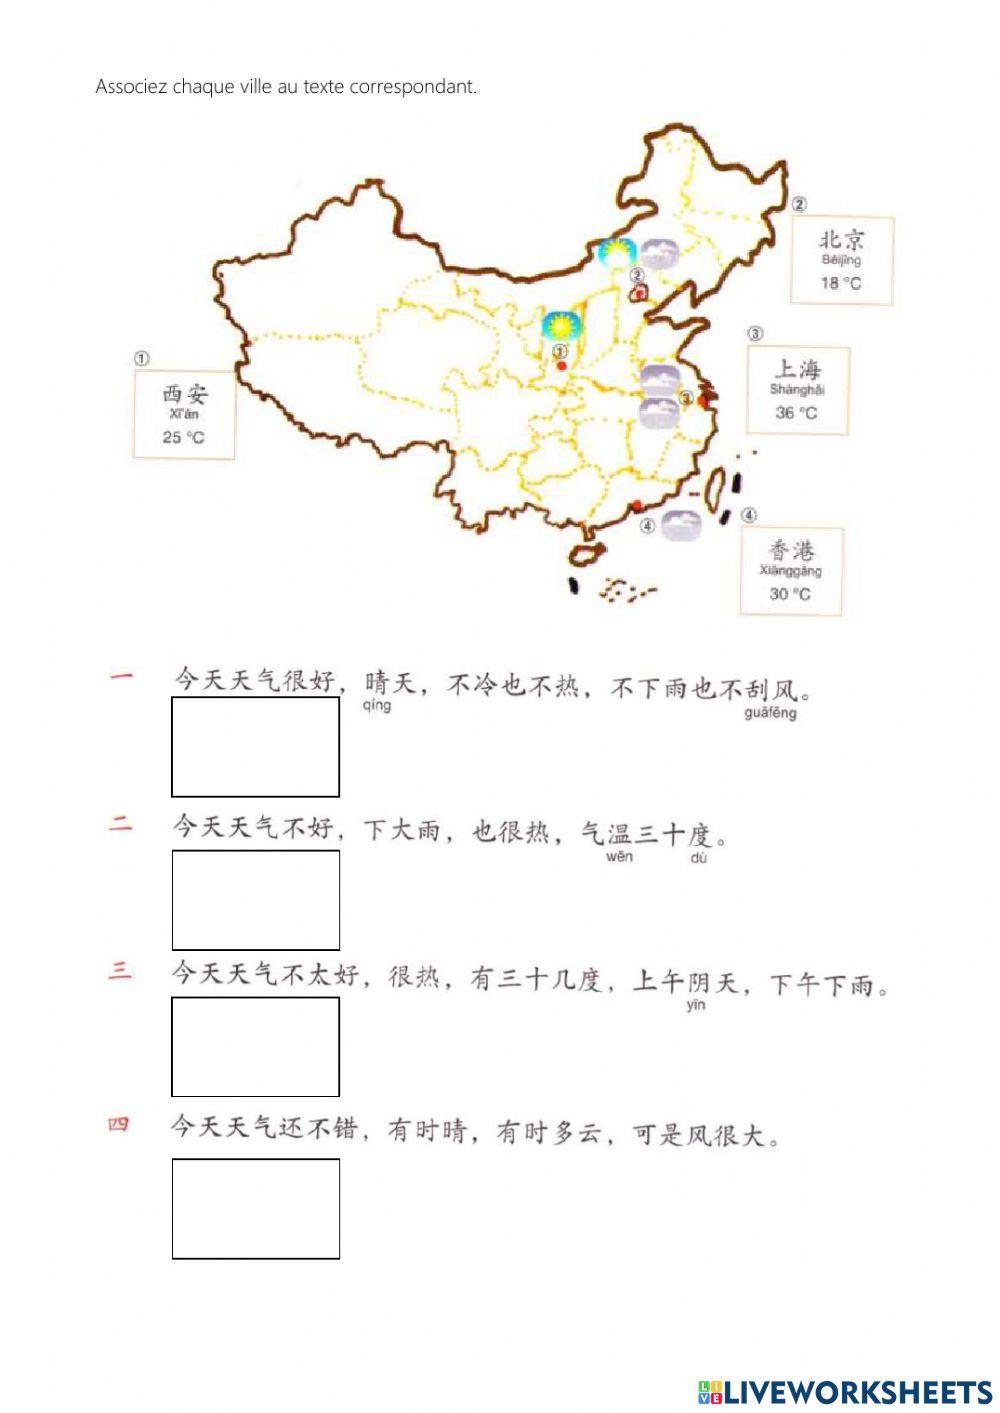 Chinese cities and the weather